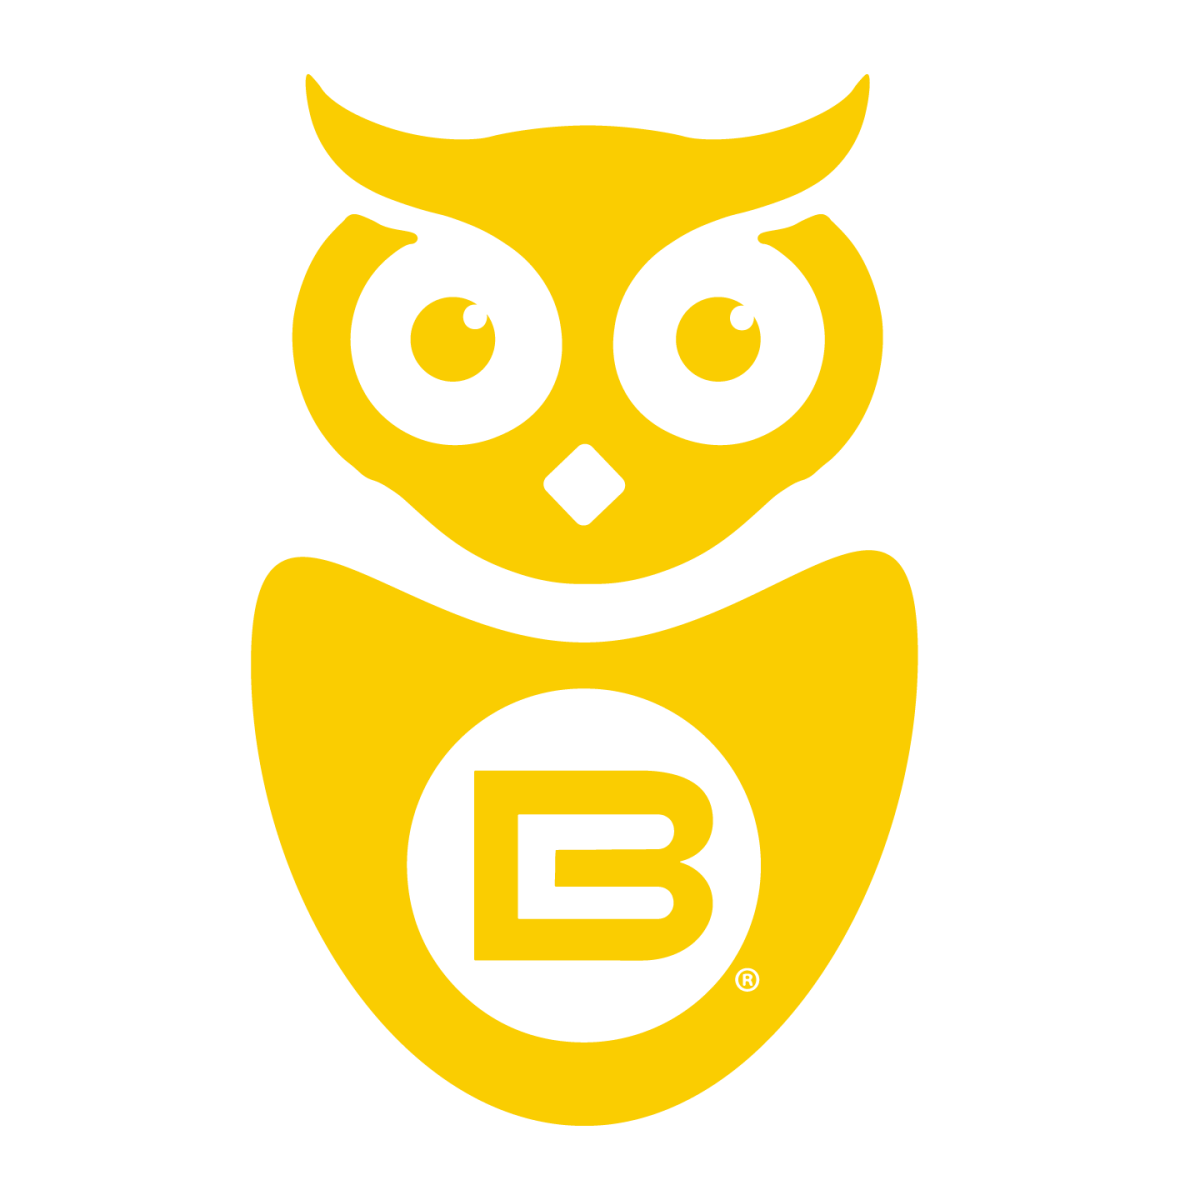 _20x20-OWL.png